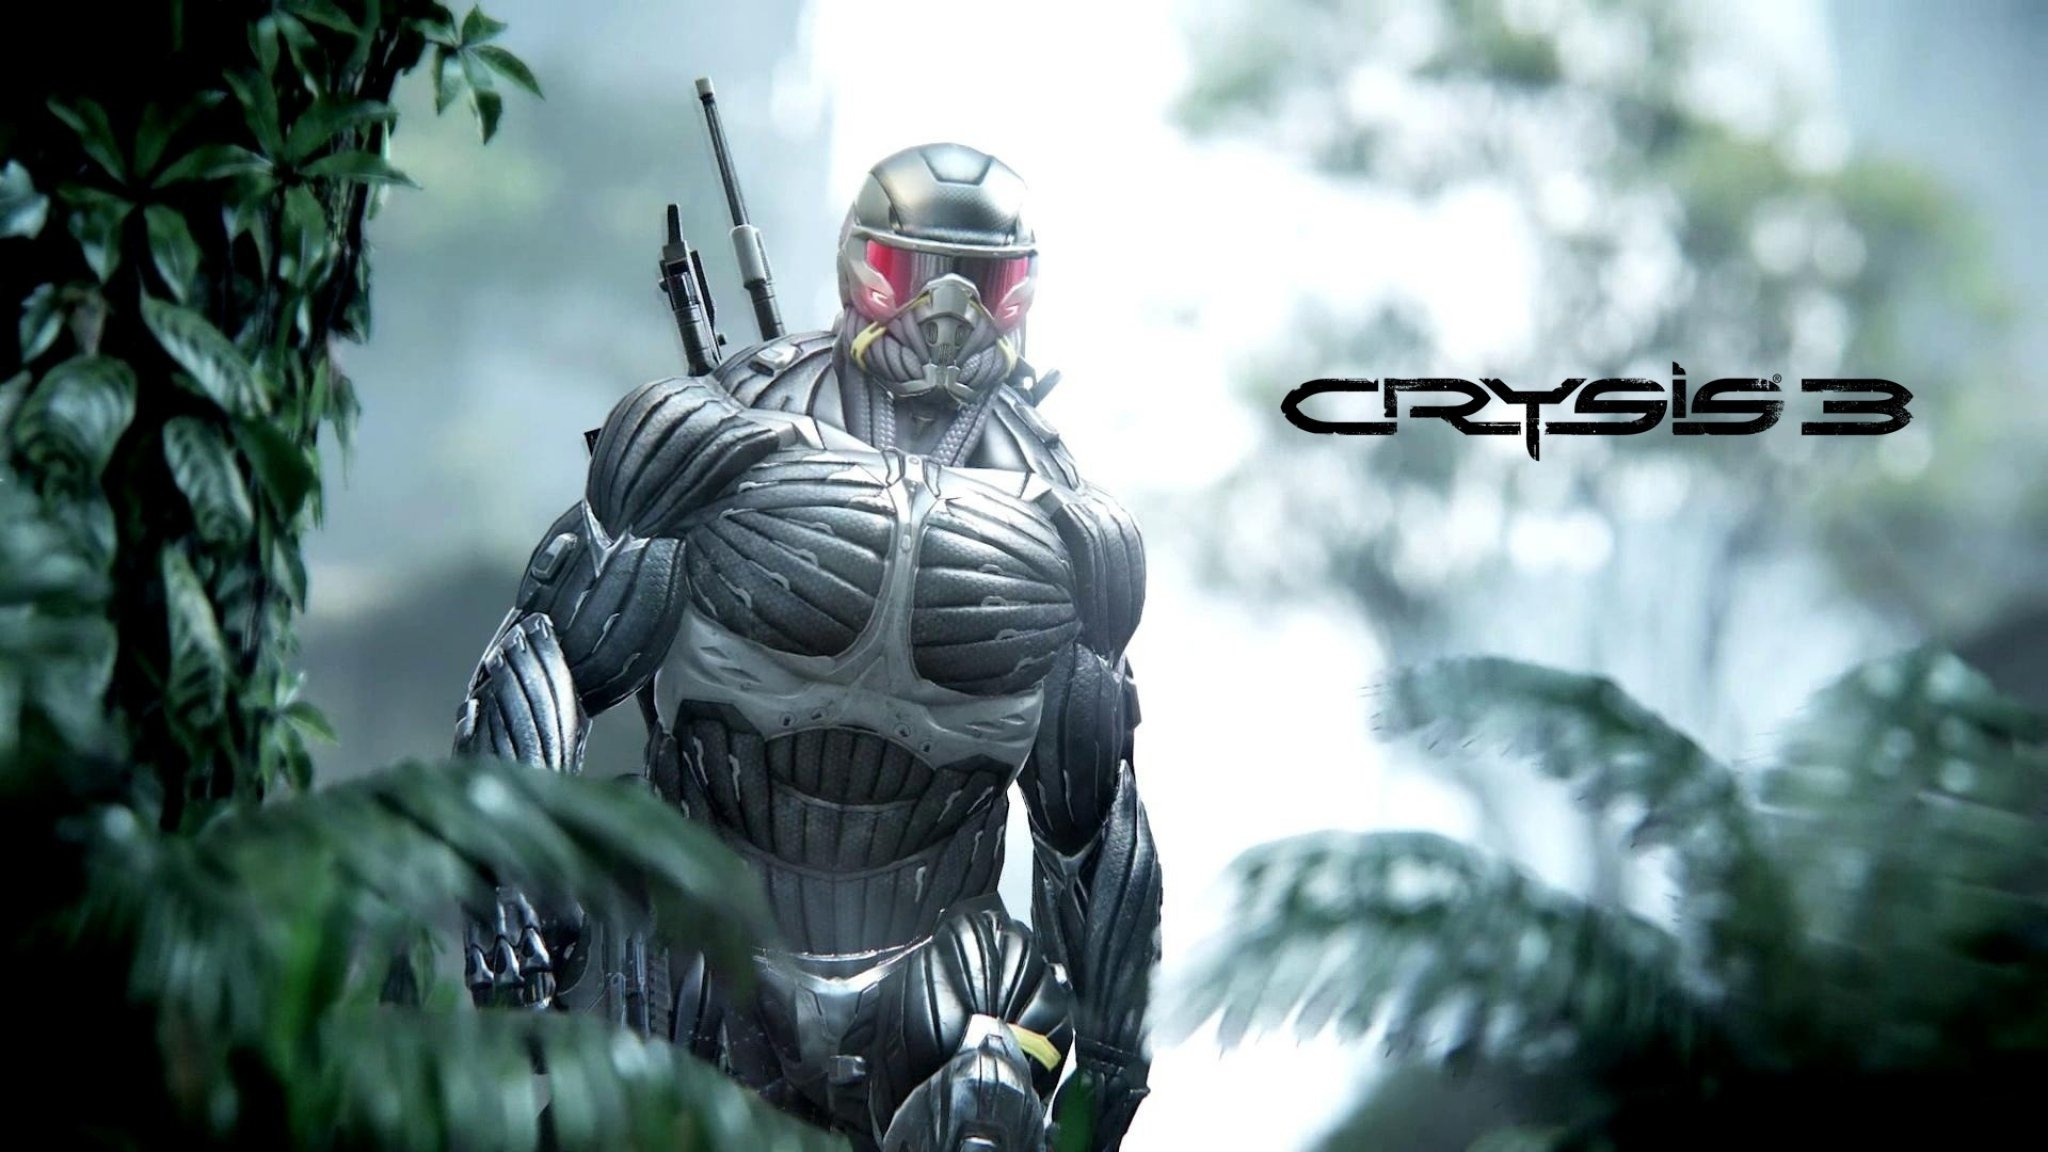 crysis, Sci fi, Fps, Shooter, Action, Fighing, Futuristic, Warrior, Military, Poster Wallpaper